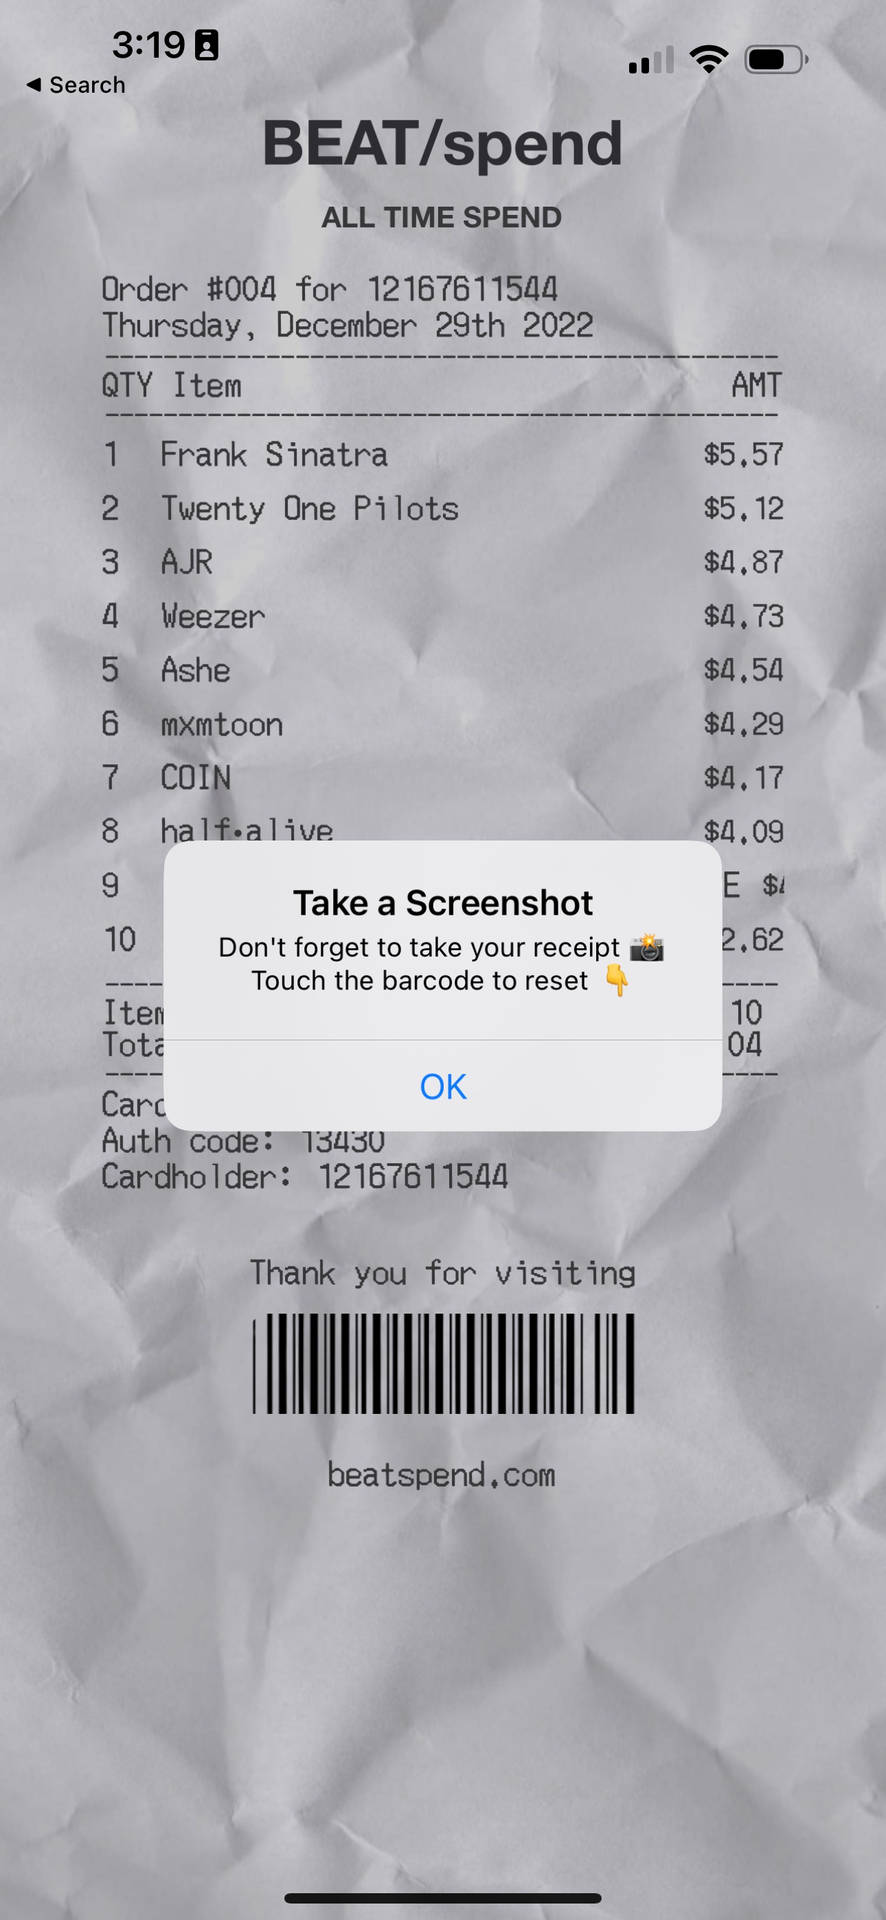 A Beat/spend Receipt Picture